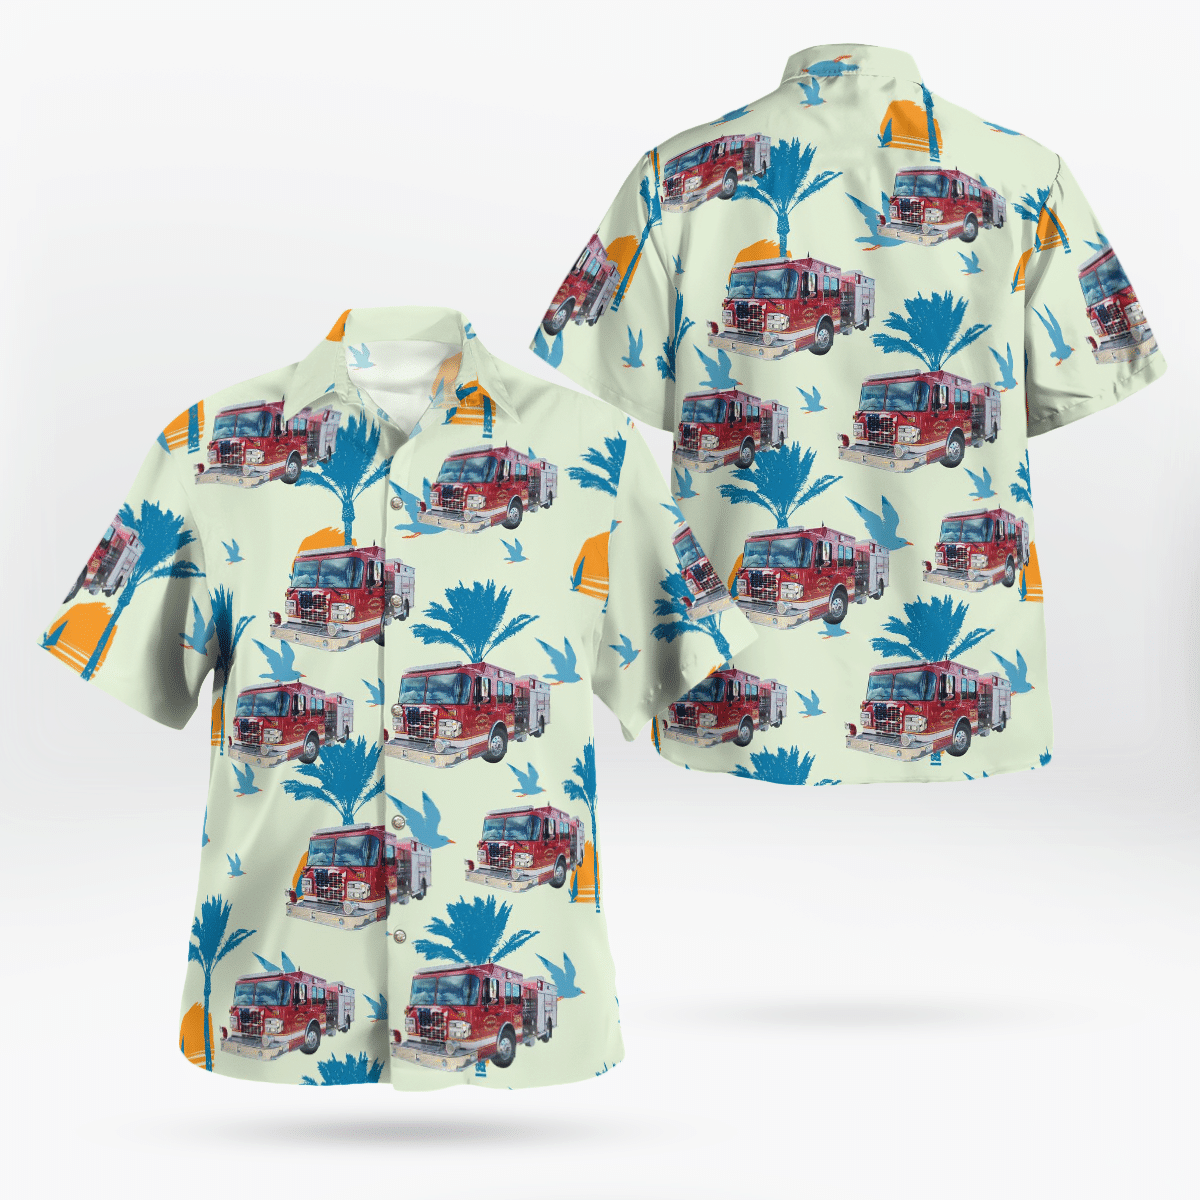 If you are in need of a new summertime look, pick up this Hawaiian shirt 190